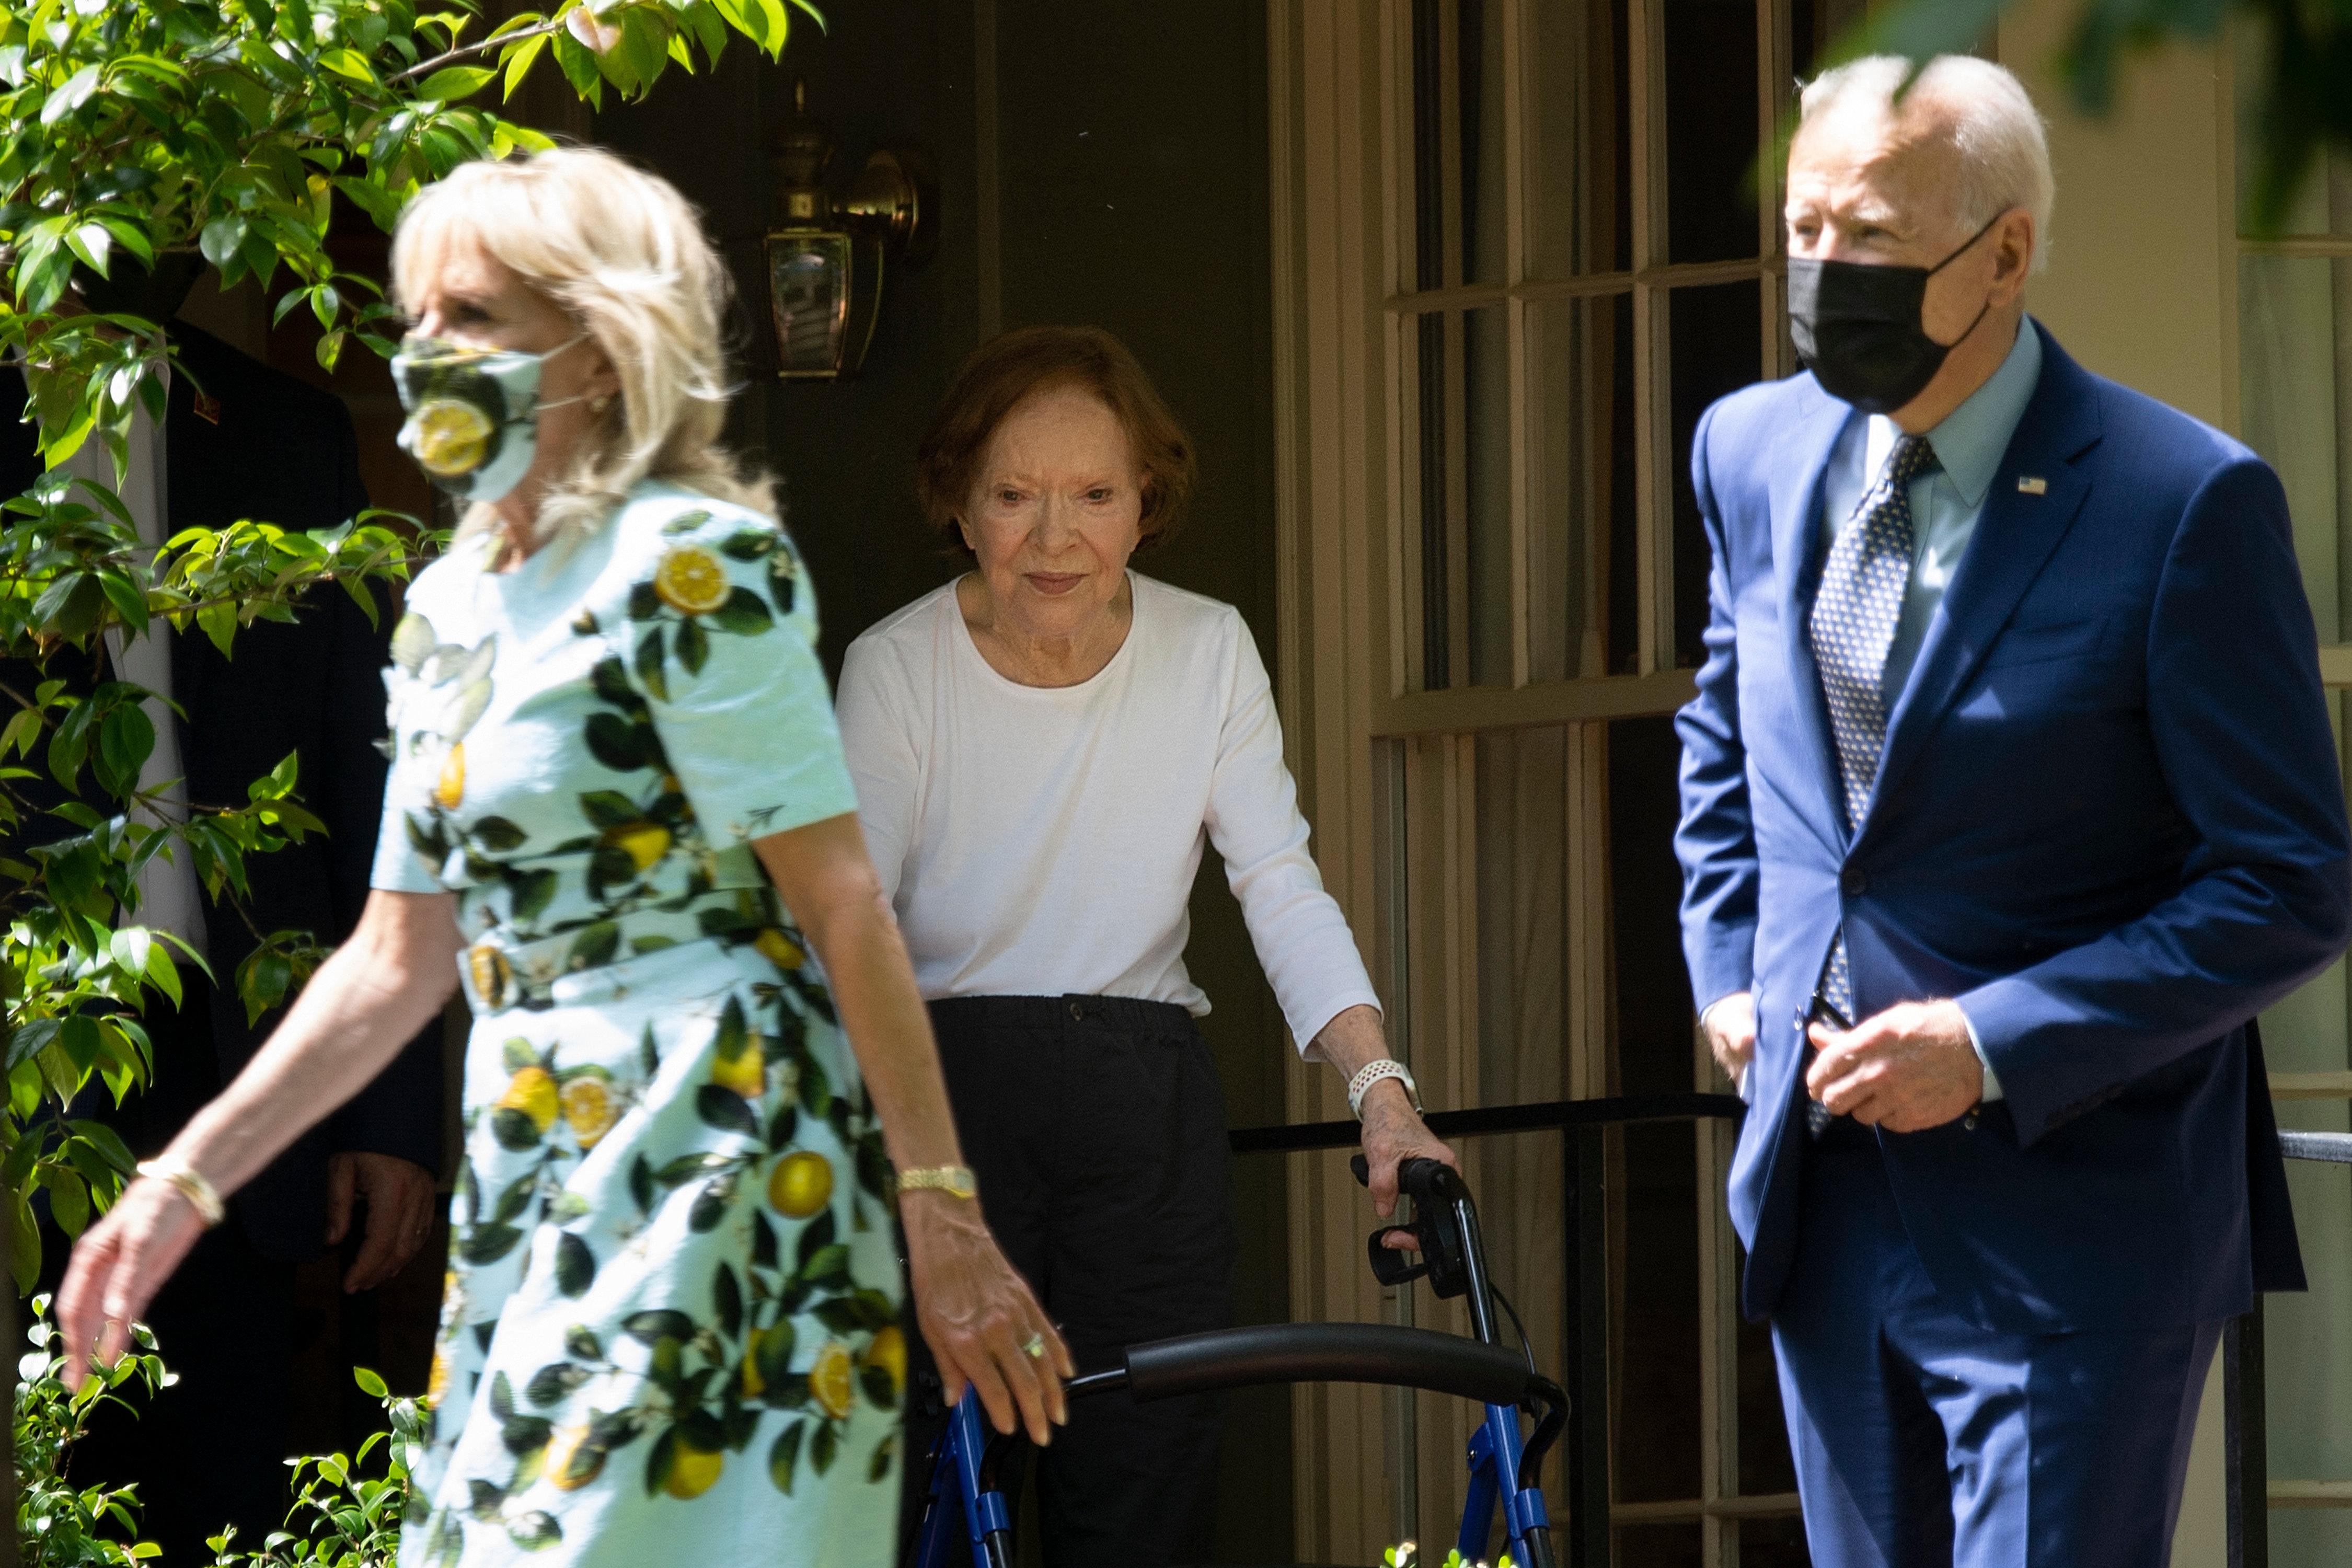 Former First Lady Rosalynn Carter (C) walks US President Joe Biden and US first lady Dr. Jill Biden out after they after visited former US President Jimmy Carter, April 29, 2021, in Plains, Georgia. (Photo by Brendan Smialowski / AFP) (Photo by BRENDAN SMIALOWSKI/AFP via Getty Images)